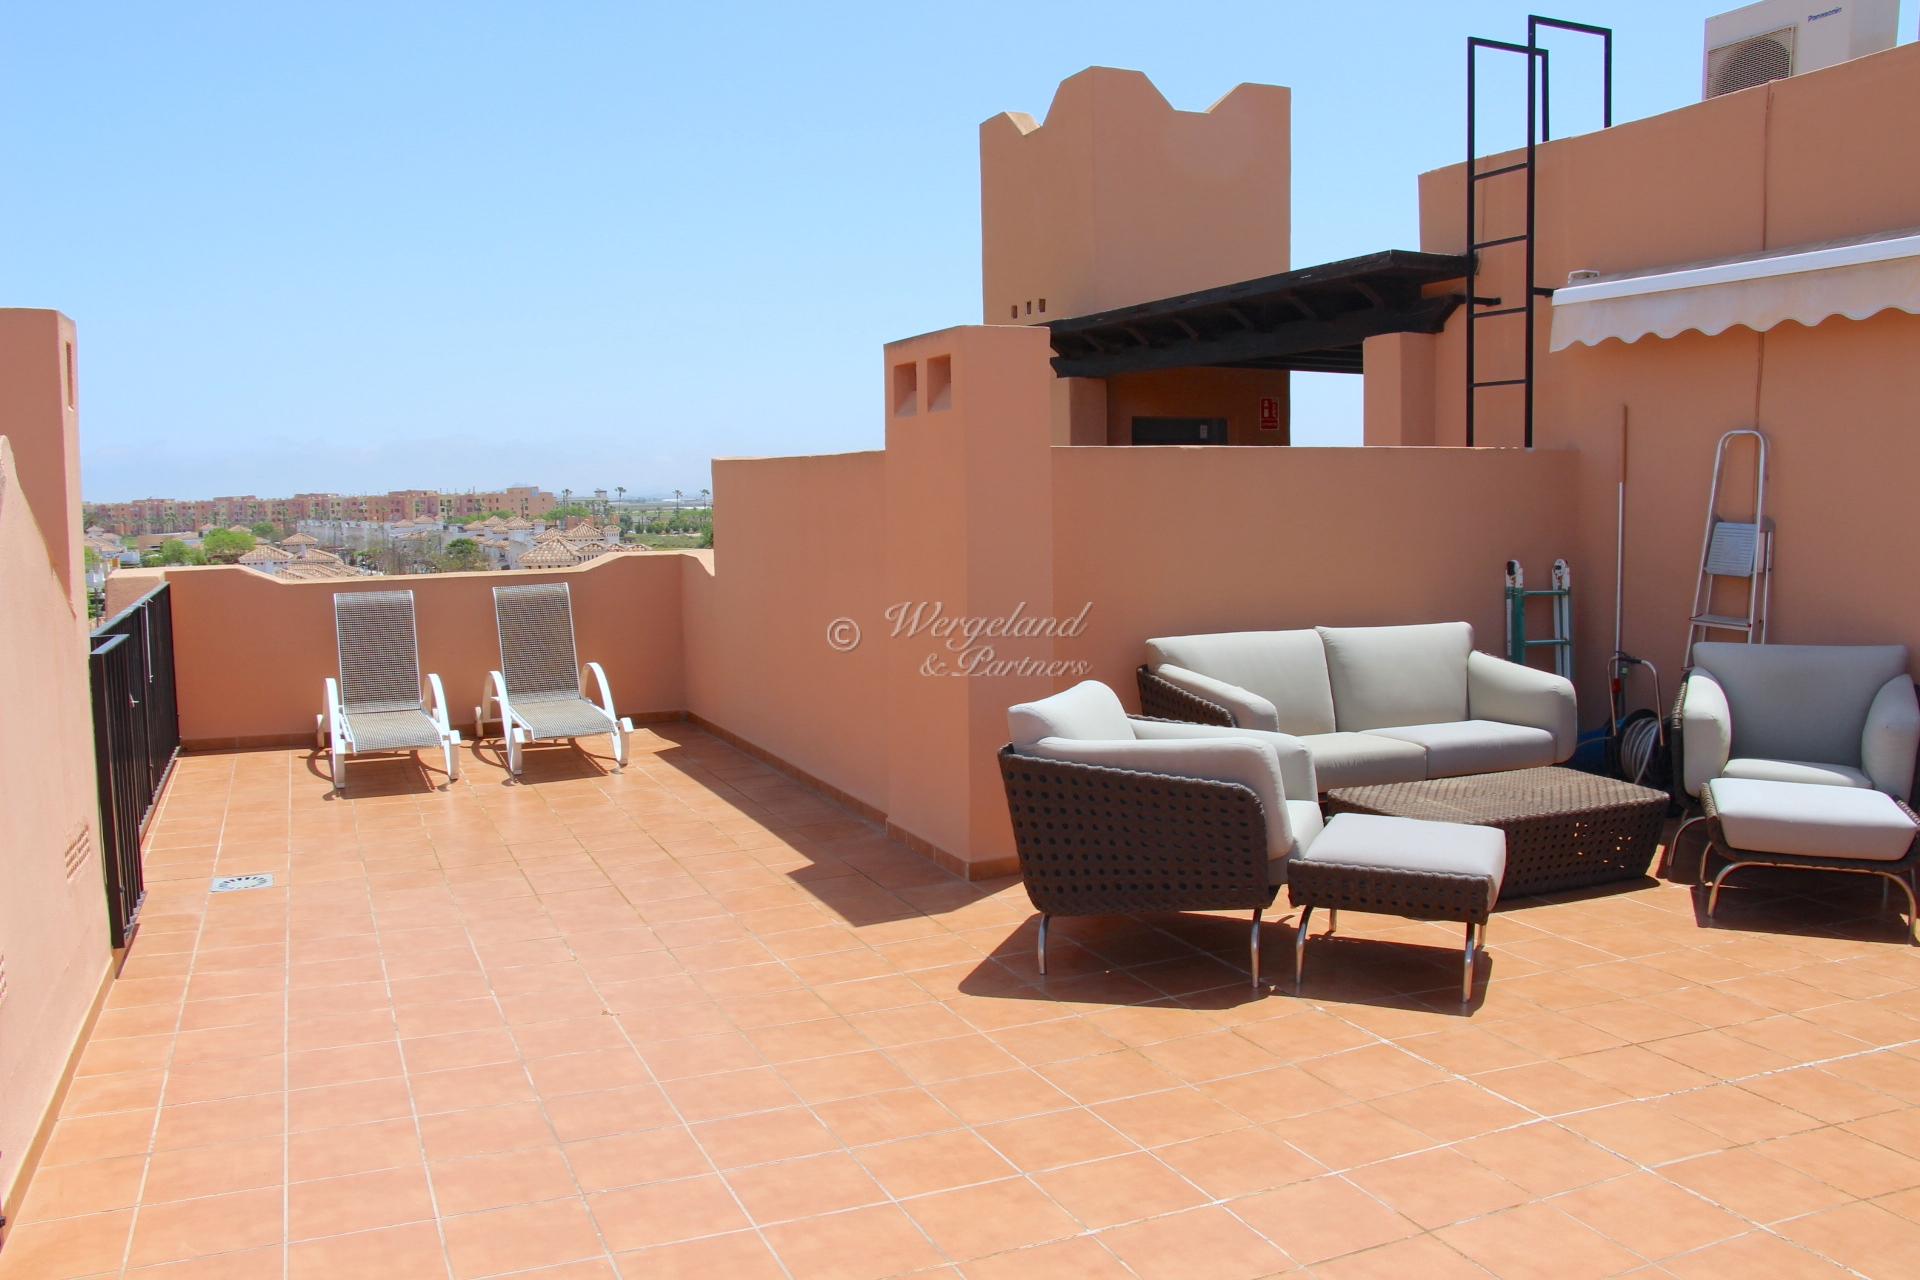 2 Bedroom furnished Penthouse with extra large terraces, great views and sun from morning to evening [331]